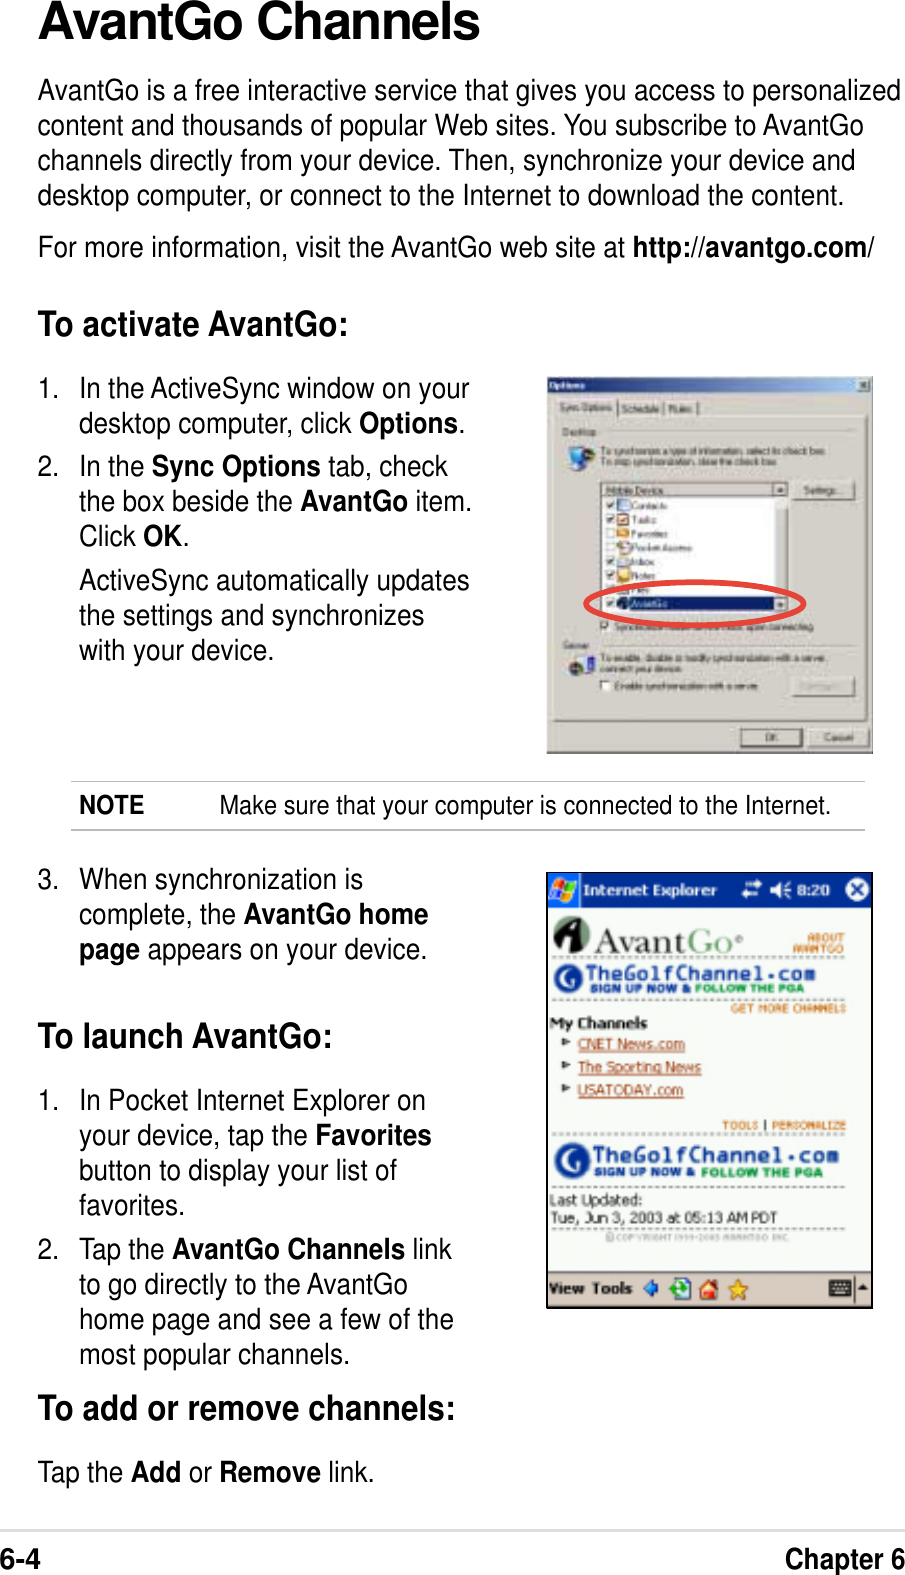 6-4Chapter 6AvantGo ChannelsAvantGo is a free interactive service that gives you access to personalizedcontent and thousands of popular Web sites. You subscribe to AvantGochannels directly from your device. Then, synchronize your device anddesktop computer, or connect to the Internet to download the content.For more information, visit the AvantGo web site at http://avantgo.com/To activate AvantGo:1. In the ActiveSync window on yourdesktop computer, click Options.2. In the Sync Options tab, checkthe box beside the AvantGo item.Click OK.ActiveSync automatically updatesthe settings and synchronizeswith your device.NOTE Make sure that your computer is connected to the Internet.3. When synchronization iscomplete, the AvantGo homepage appears on your device.To launch AvantGo:1. In Pocket Internet Explorer onyour device, tap the Favoritesbutton to display your list offavorites.2. Tap the AvantGo Channels linkto go directly to the AvantGohome page and see a few of themost popular channels.To add or remove channels:Tap the Add or Remove link.